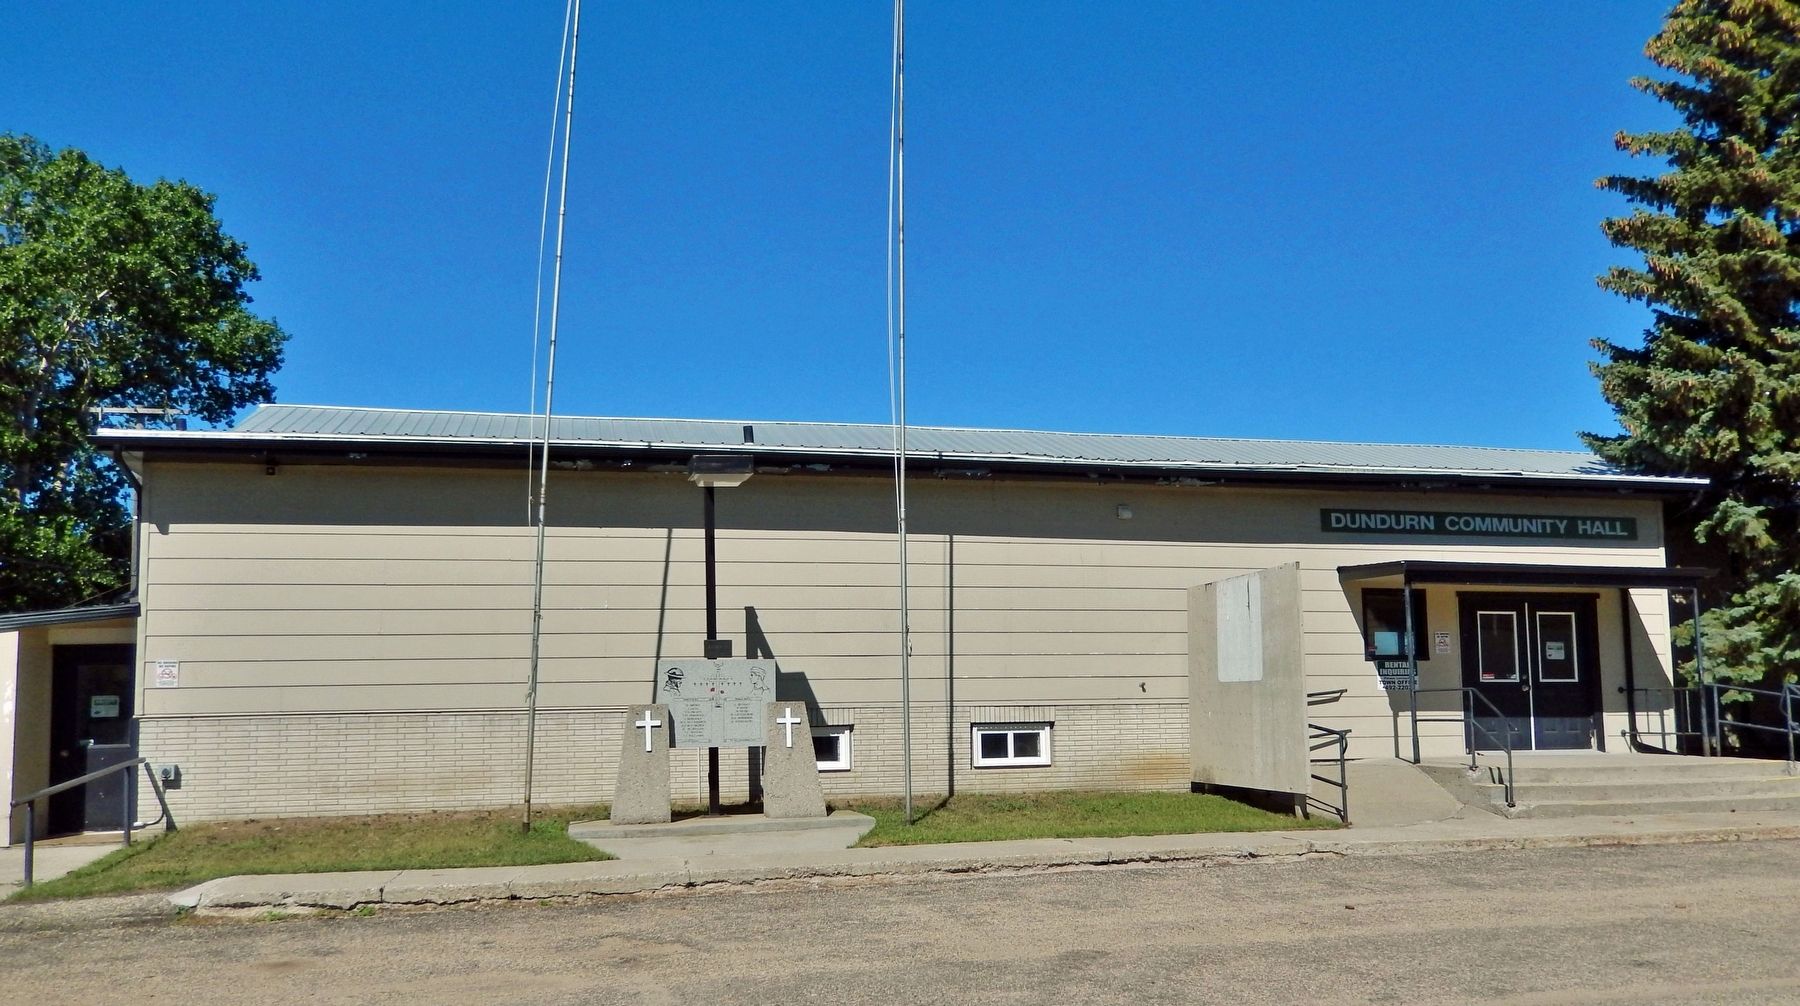 Dundurn Community Hall image. Click for full size.